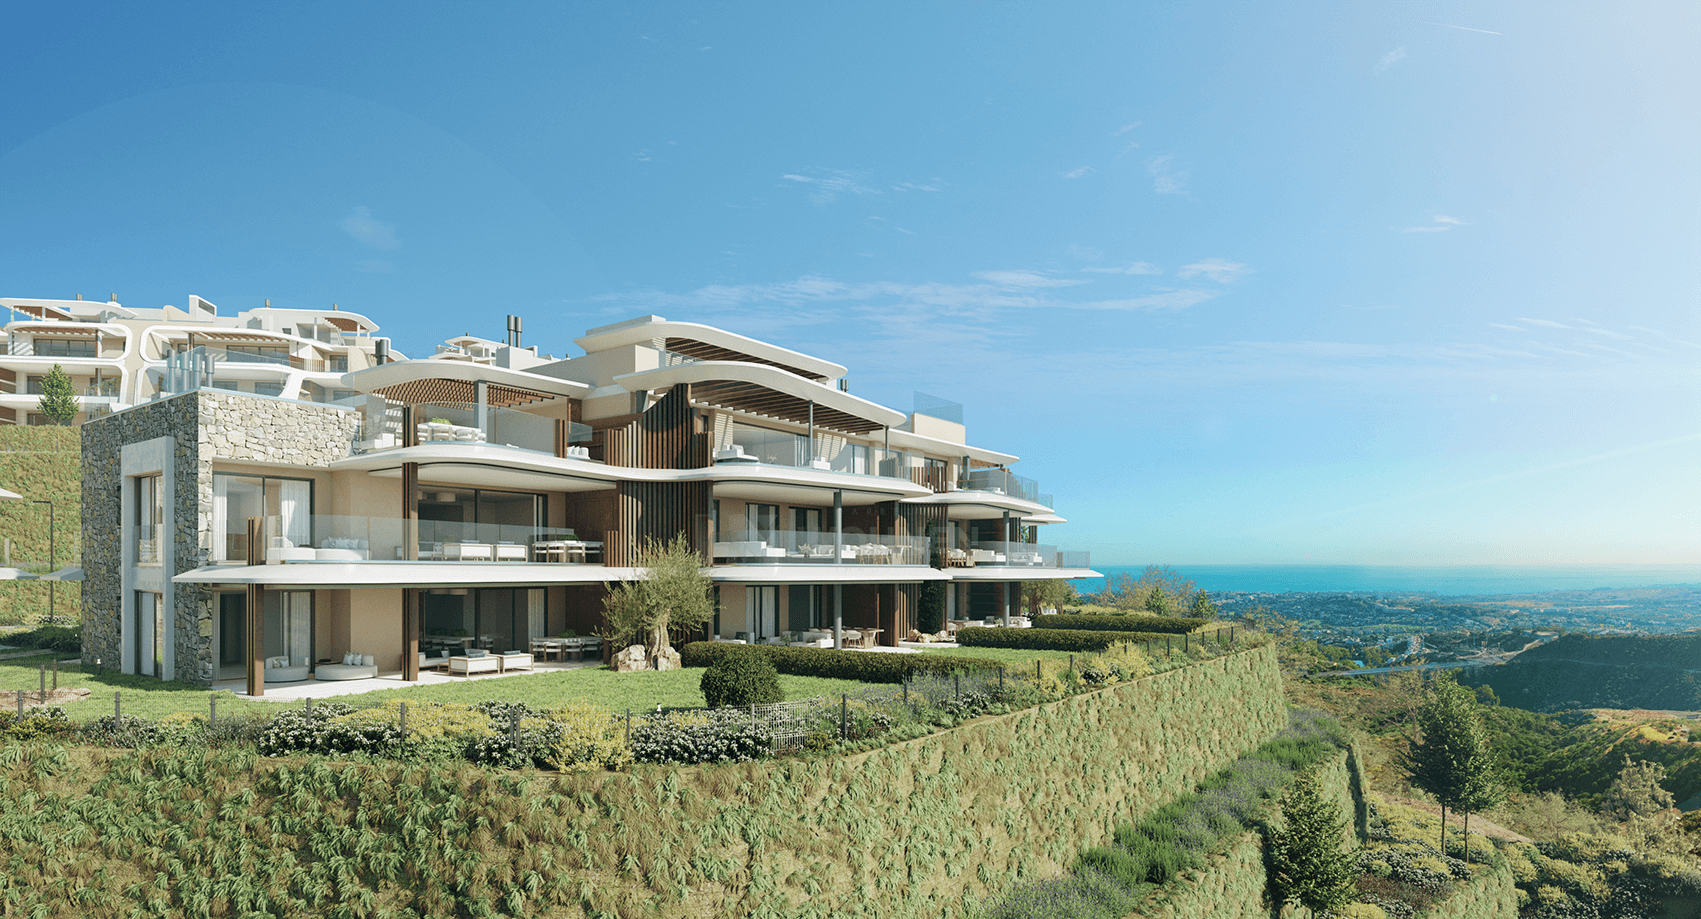 Impressive apartments with spectacular panoramic views of the coast